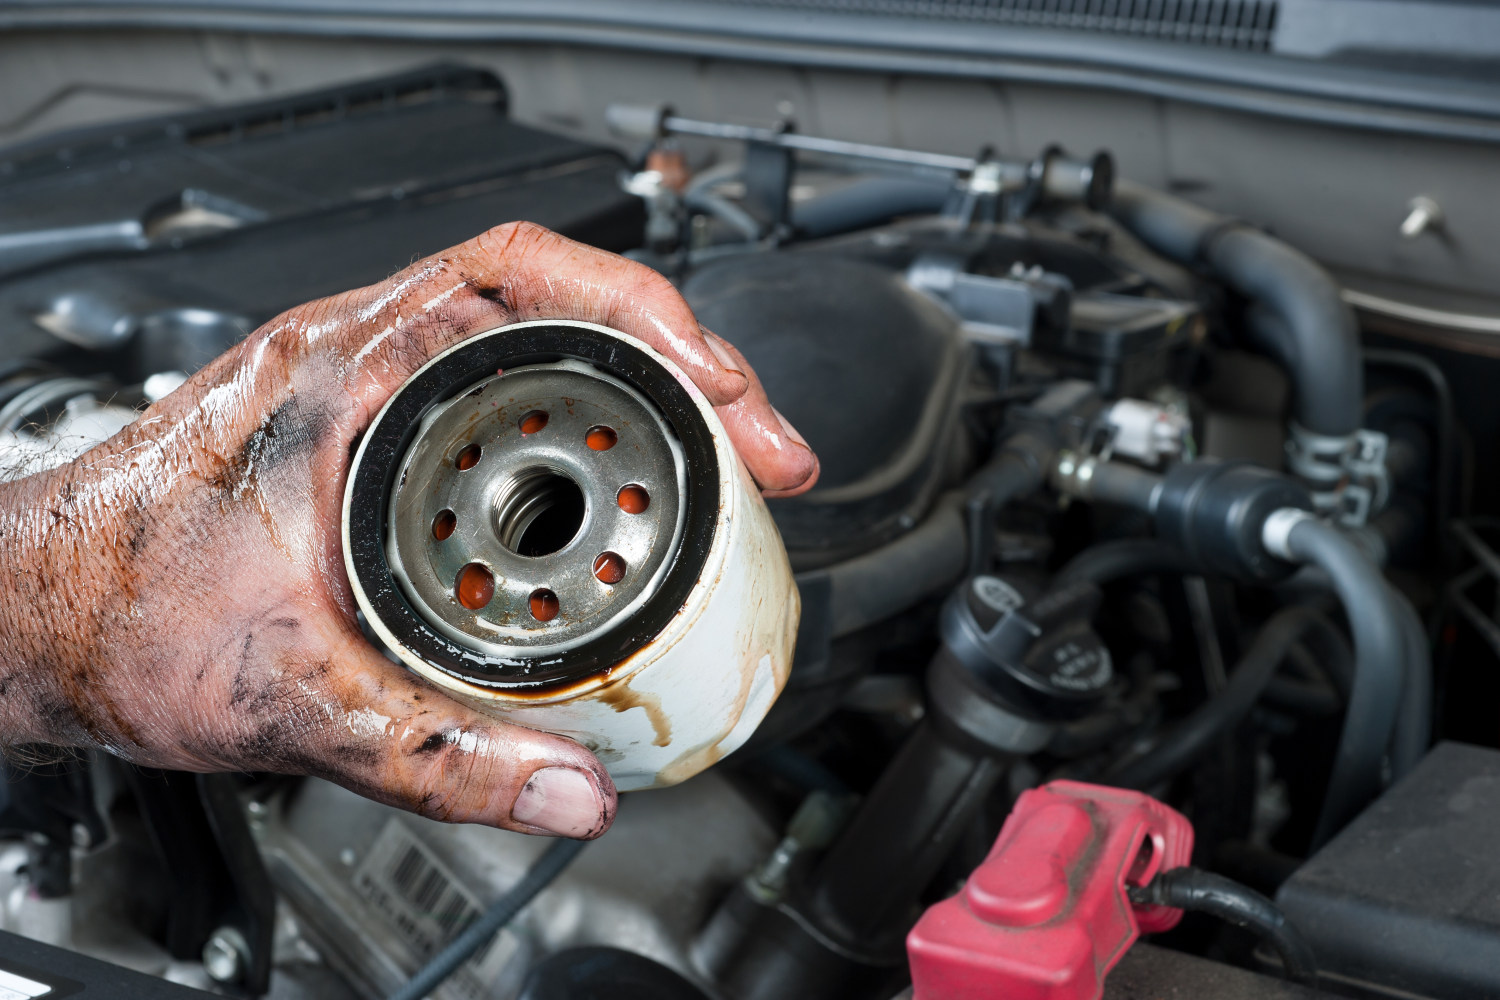 Mospart | Oil Filter Maintenance: Tips and Tricks for Prolonging the Life of Your Vehicle